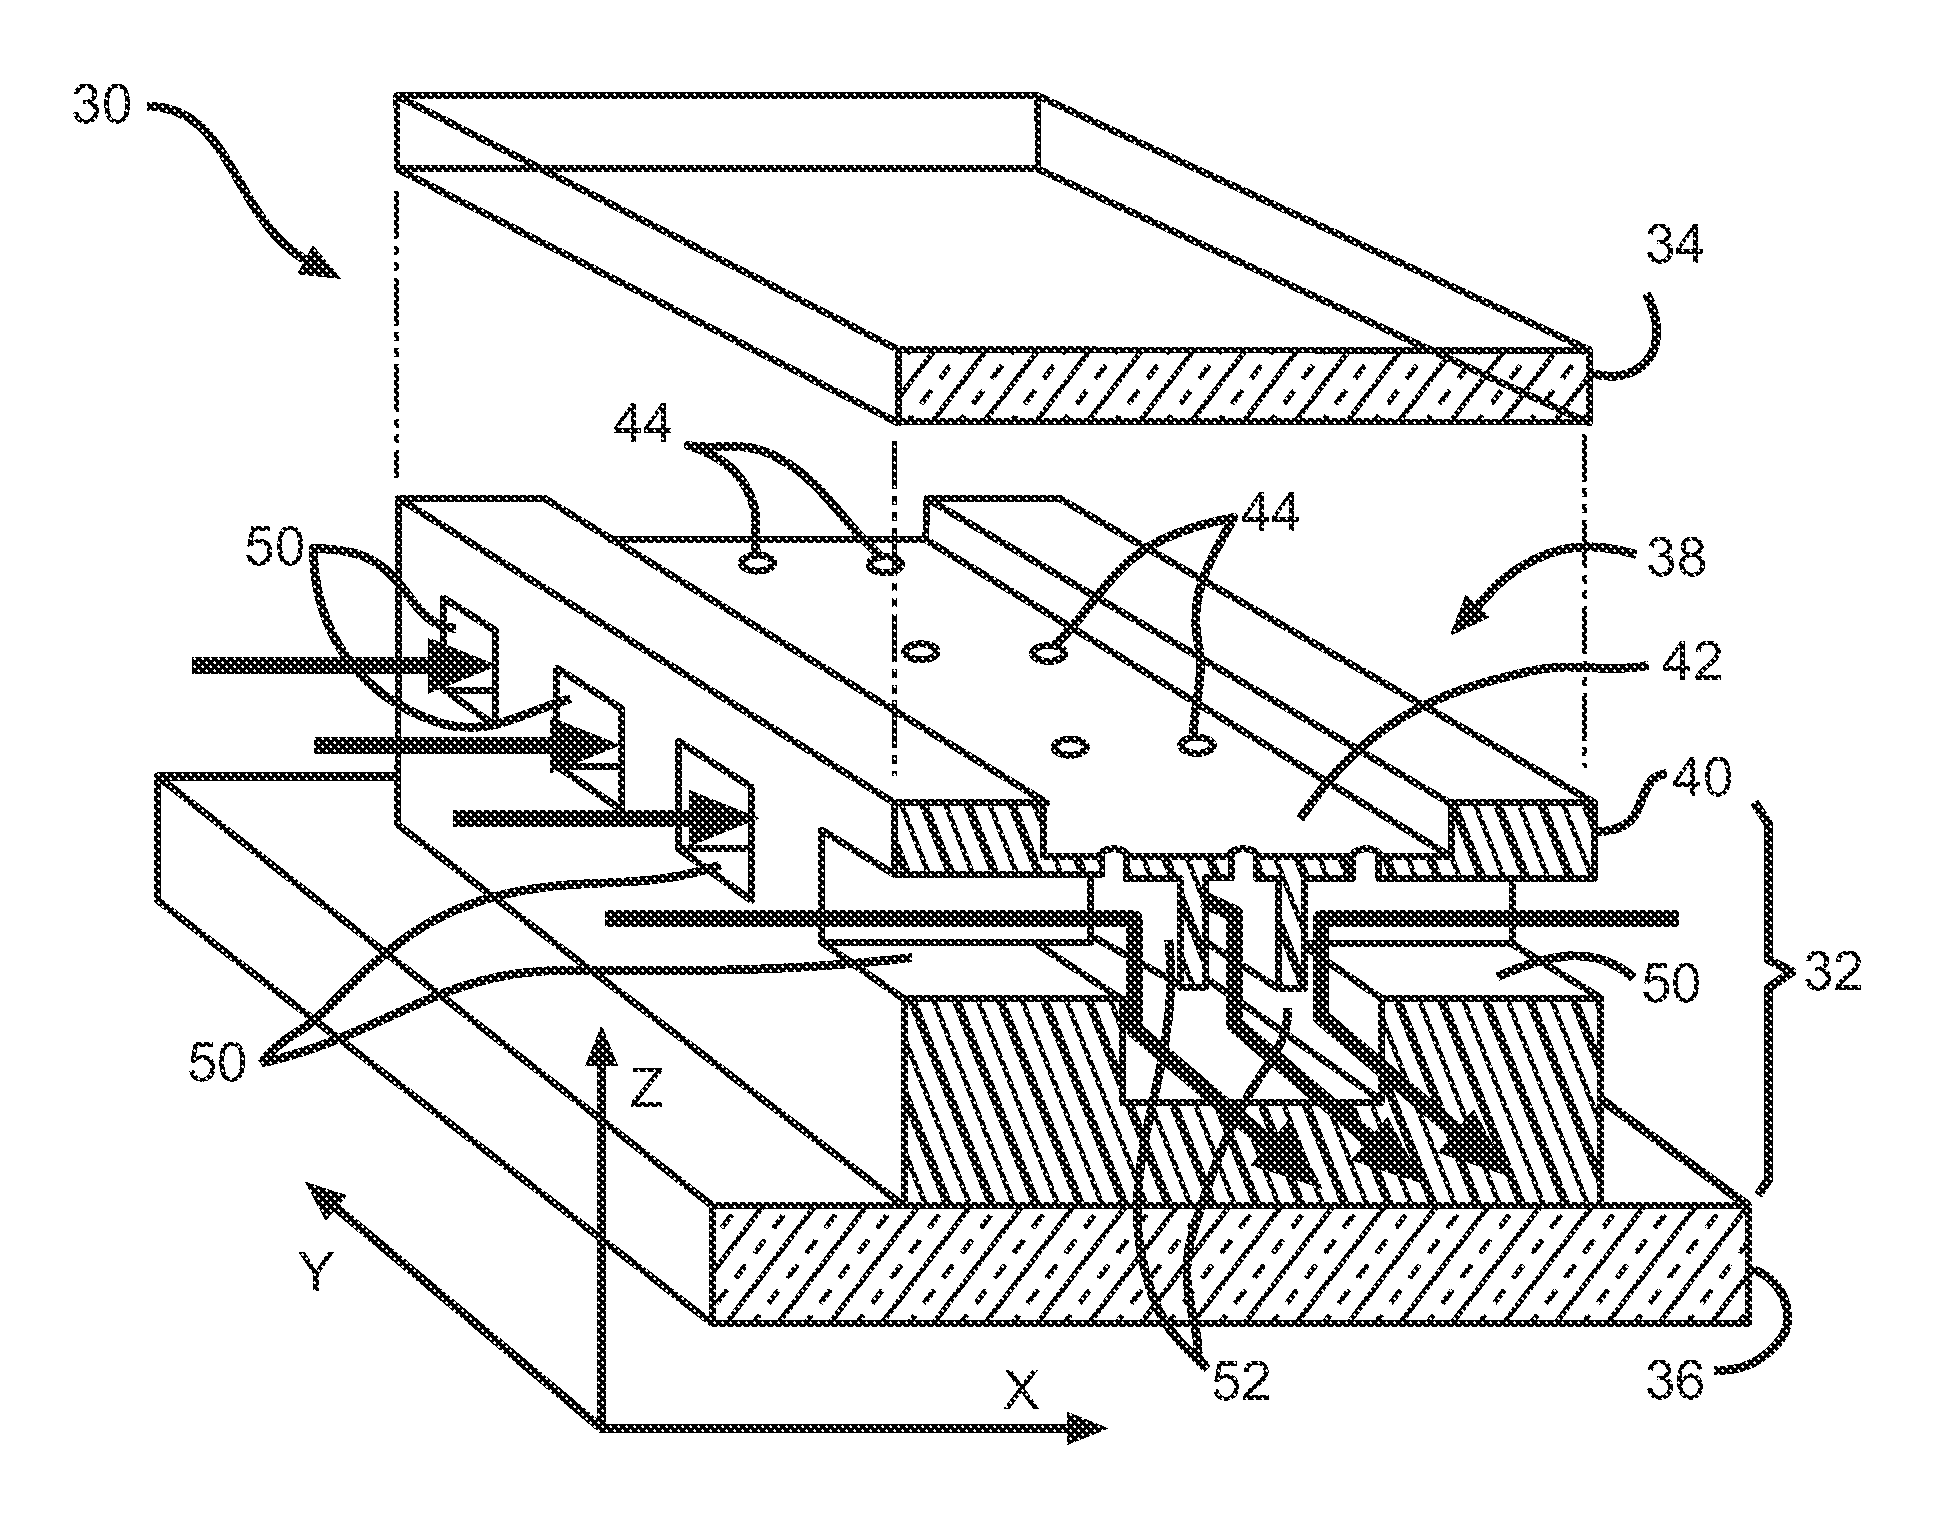 Microfluidic Device and Related Methods